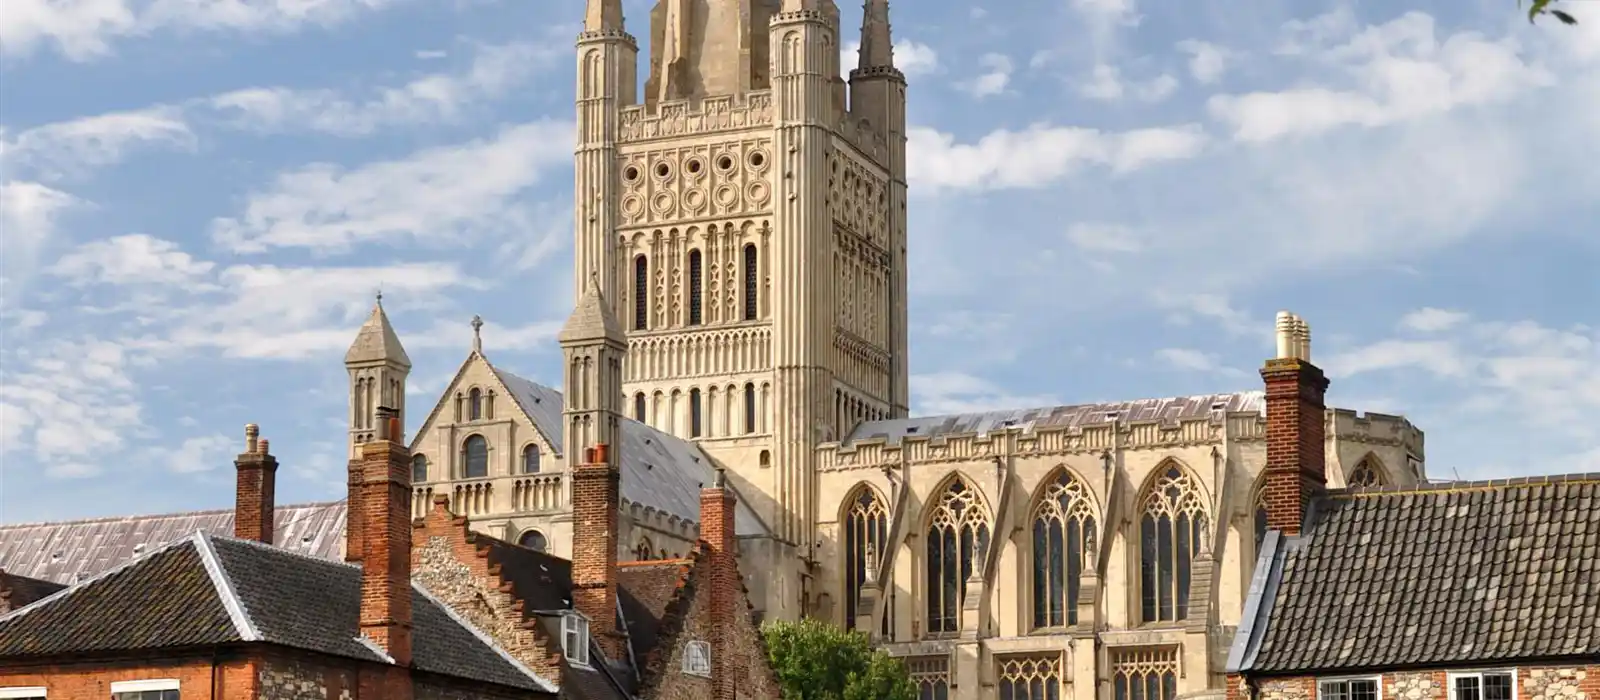 Norwich Cathedral is free to visit